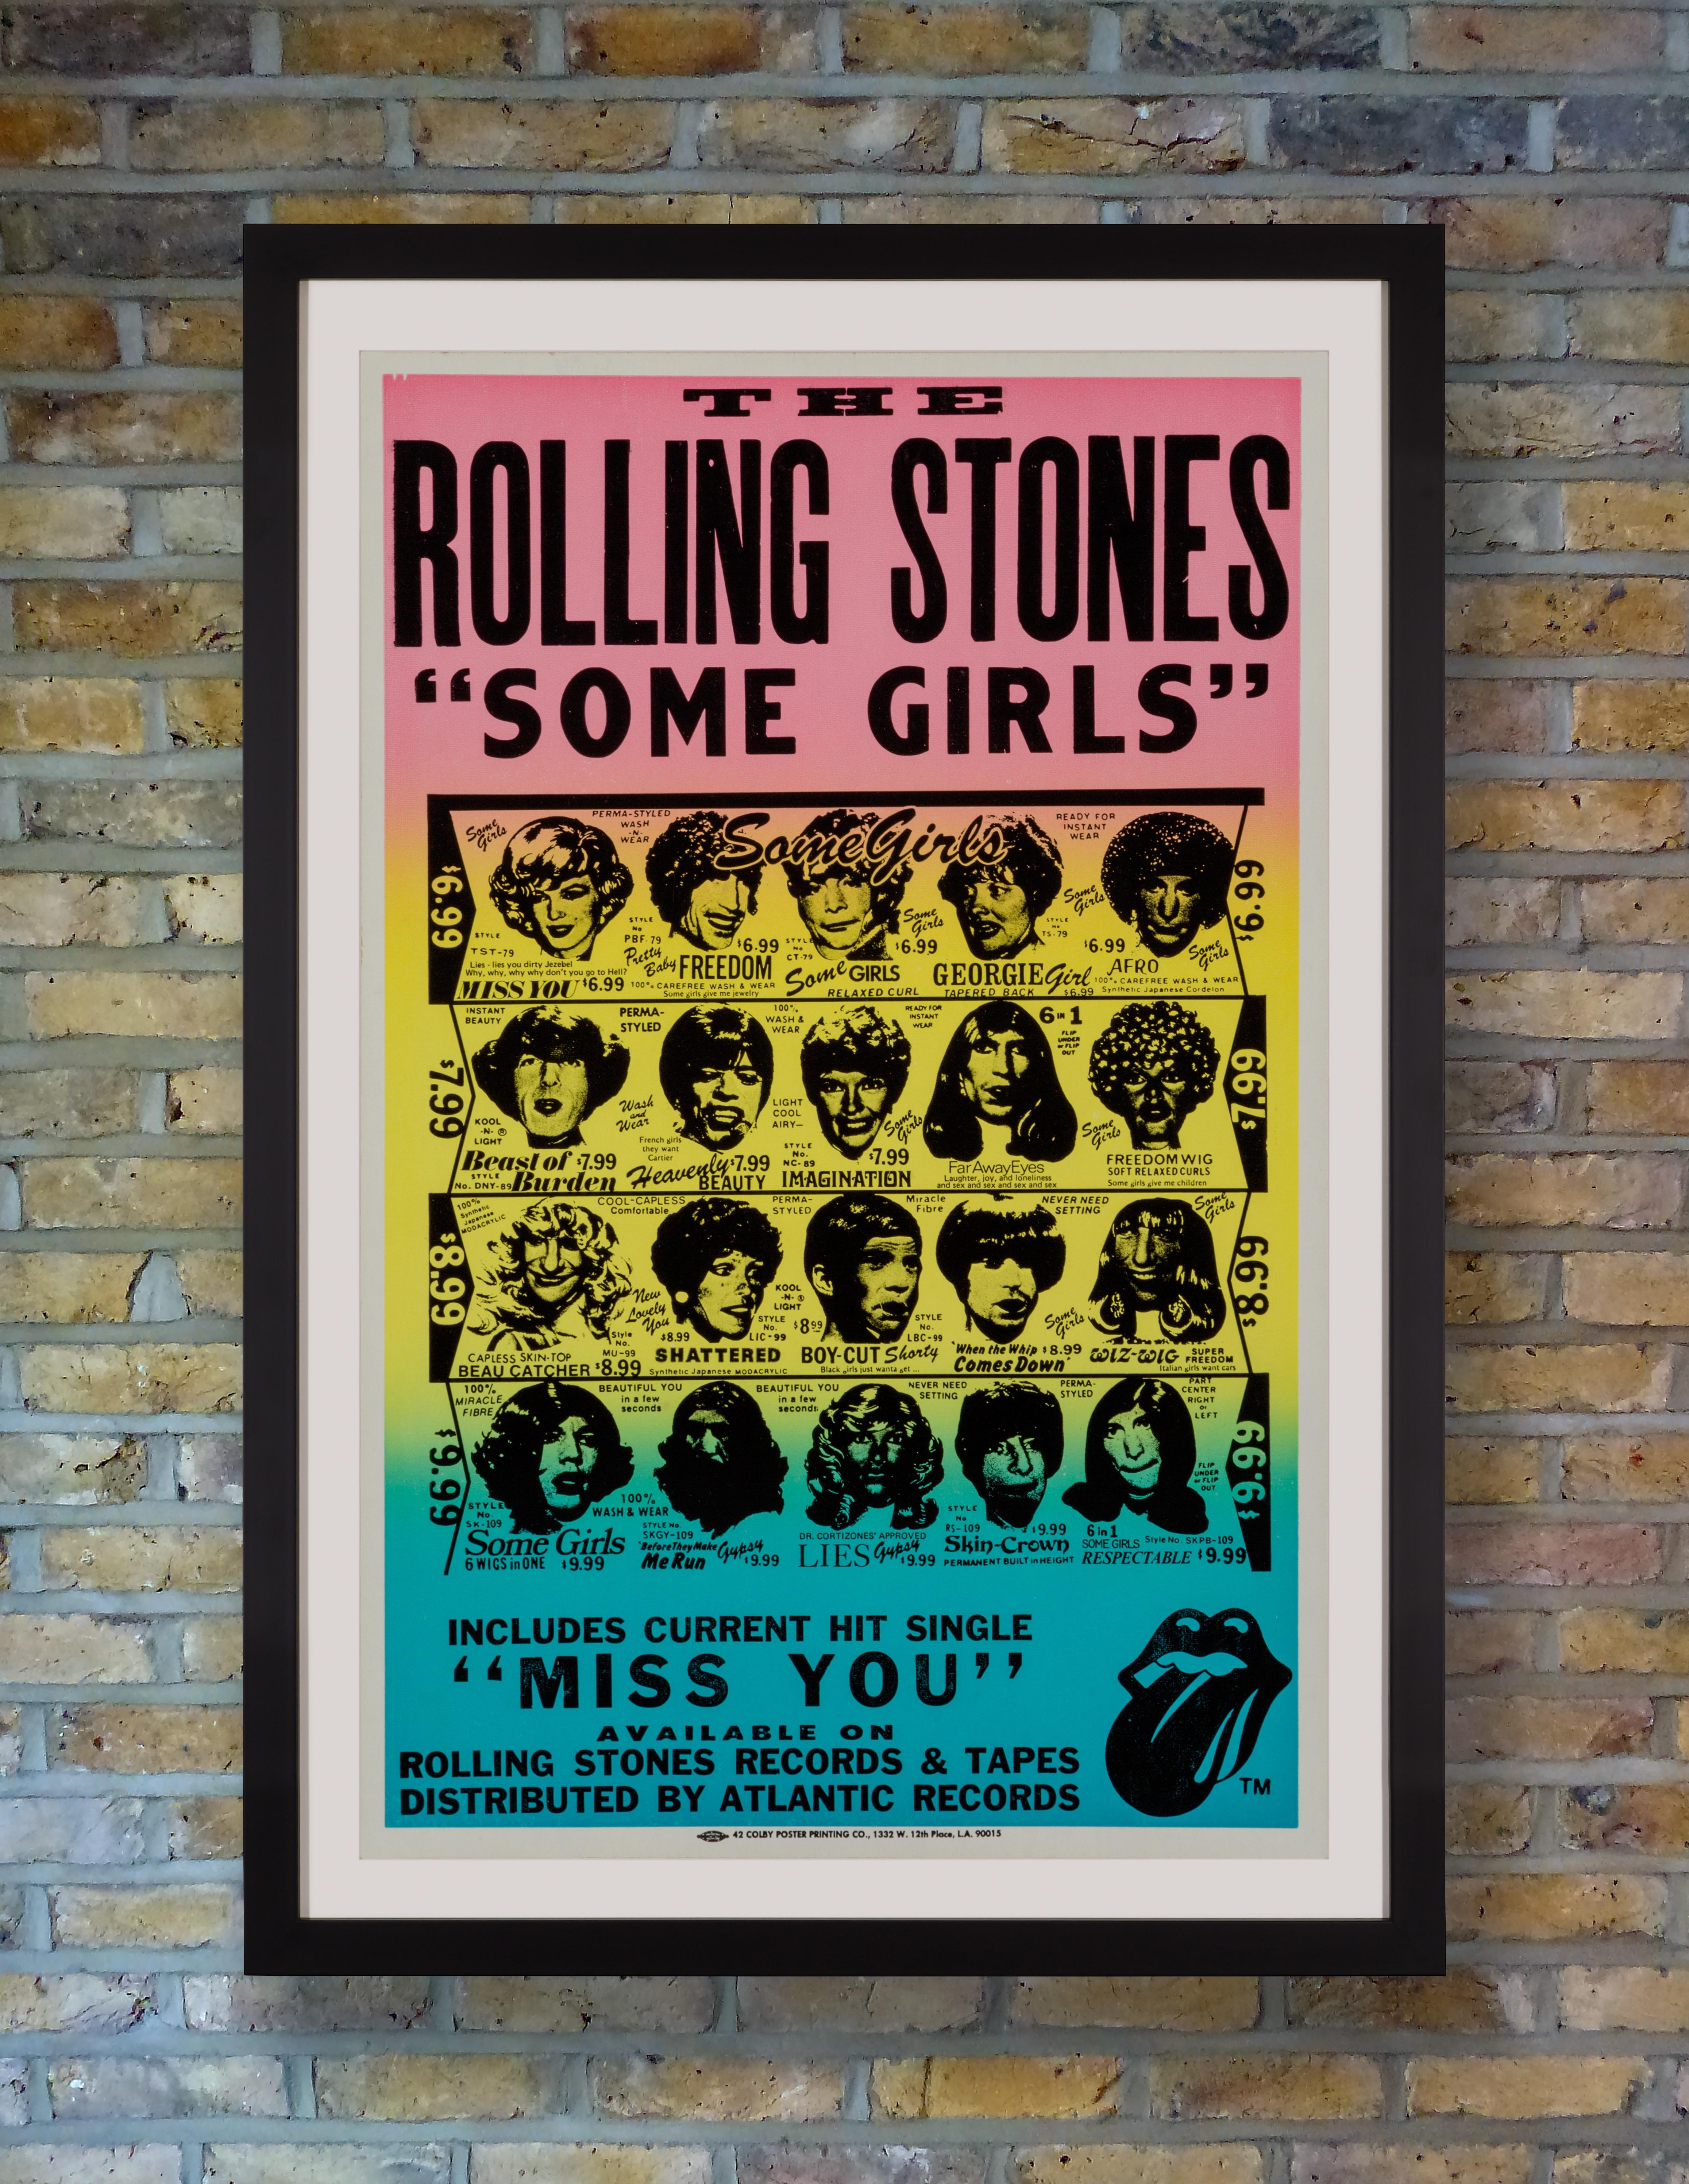 A rare boxing-style promotional poster for The Rolling Stones 1978 album 